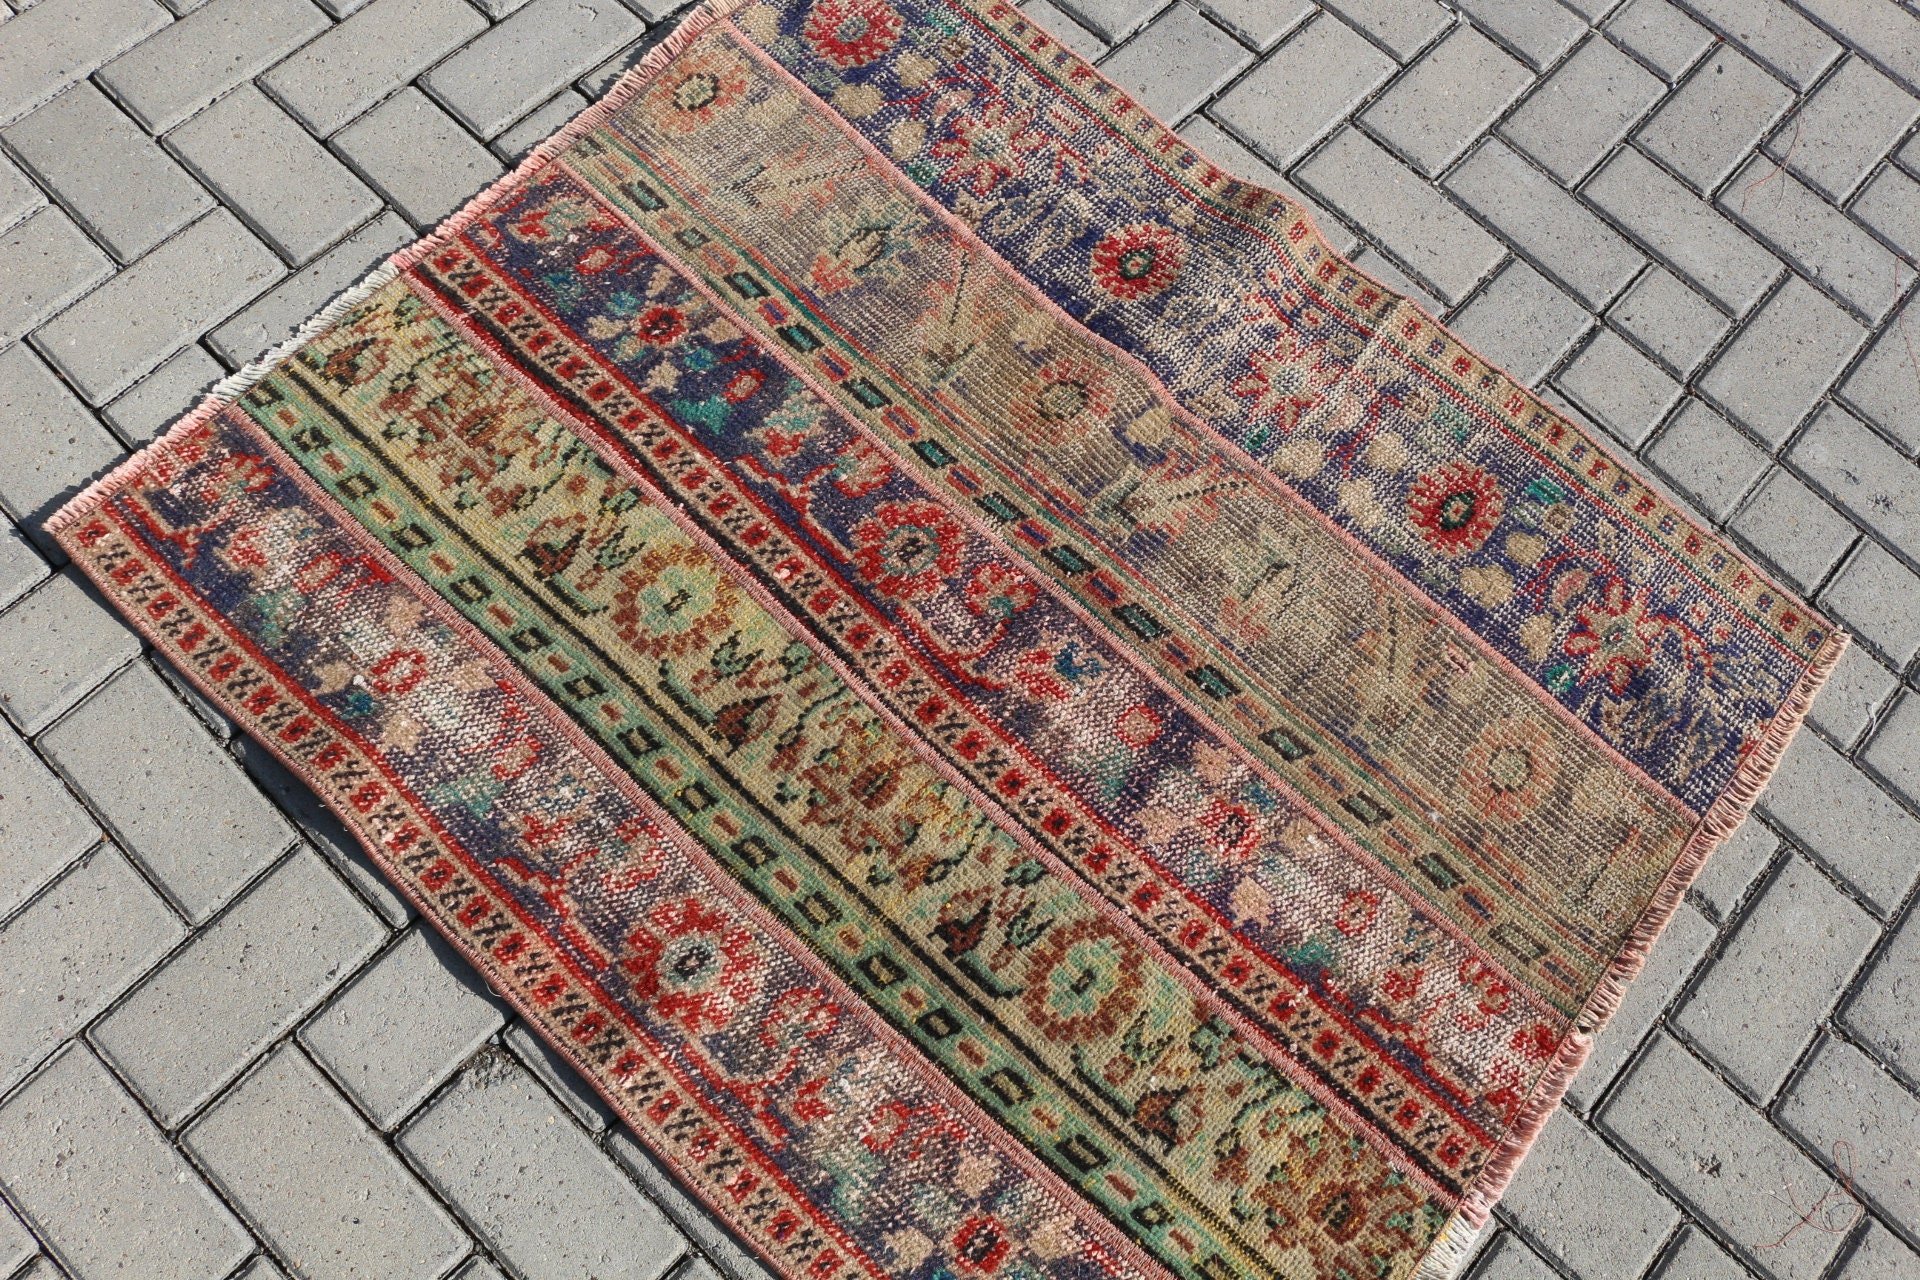 Blue Antique Rug, Car Mat Rug, 3.1x3.7 ft Small Rugs, Wool Rugs, Rugs for Door Mat, Door Mat Rugs, Oushak Rug, Turkish Rugs, Vintage Rug